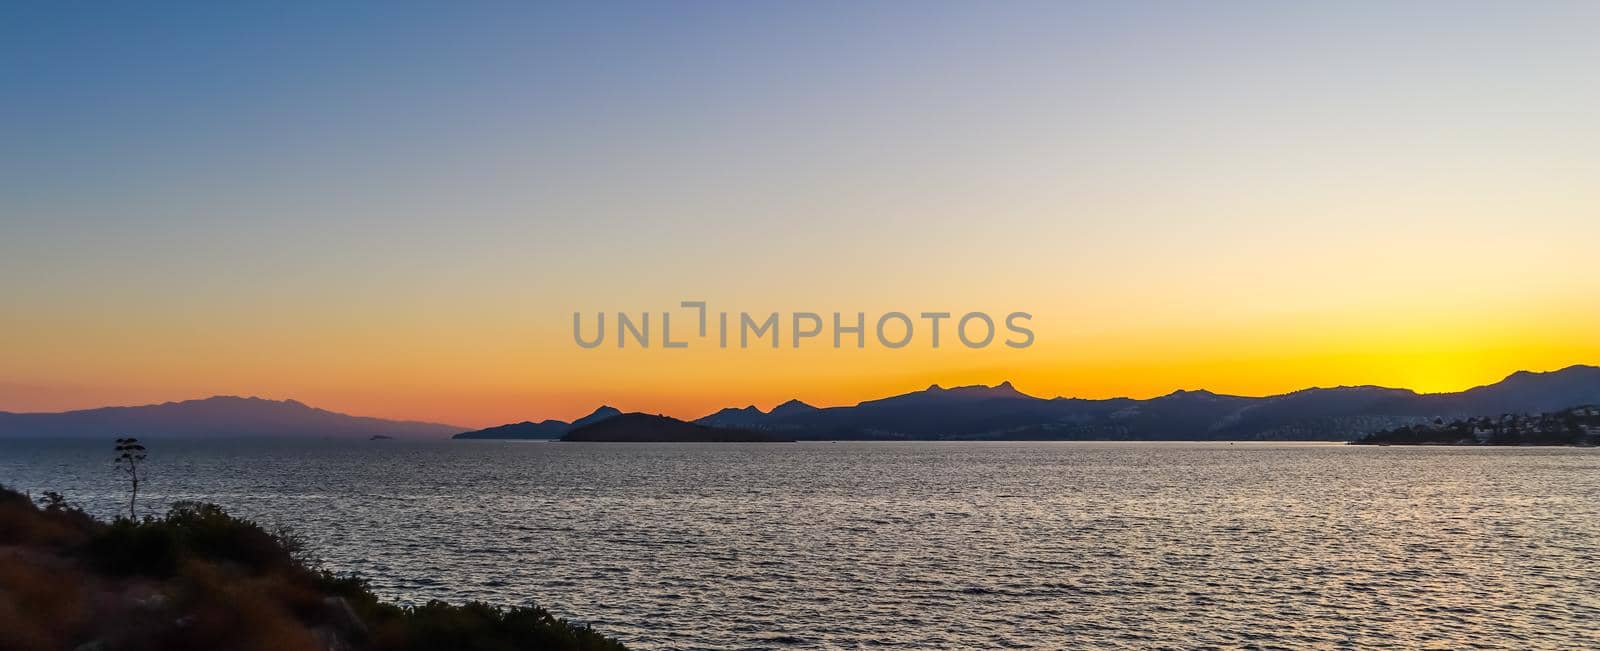 Beautiful sunset on the Mediterranean coast with islands and mountains. Stones on the beach lit by sunlight.